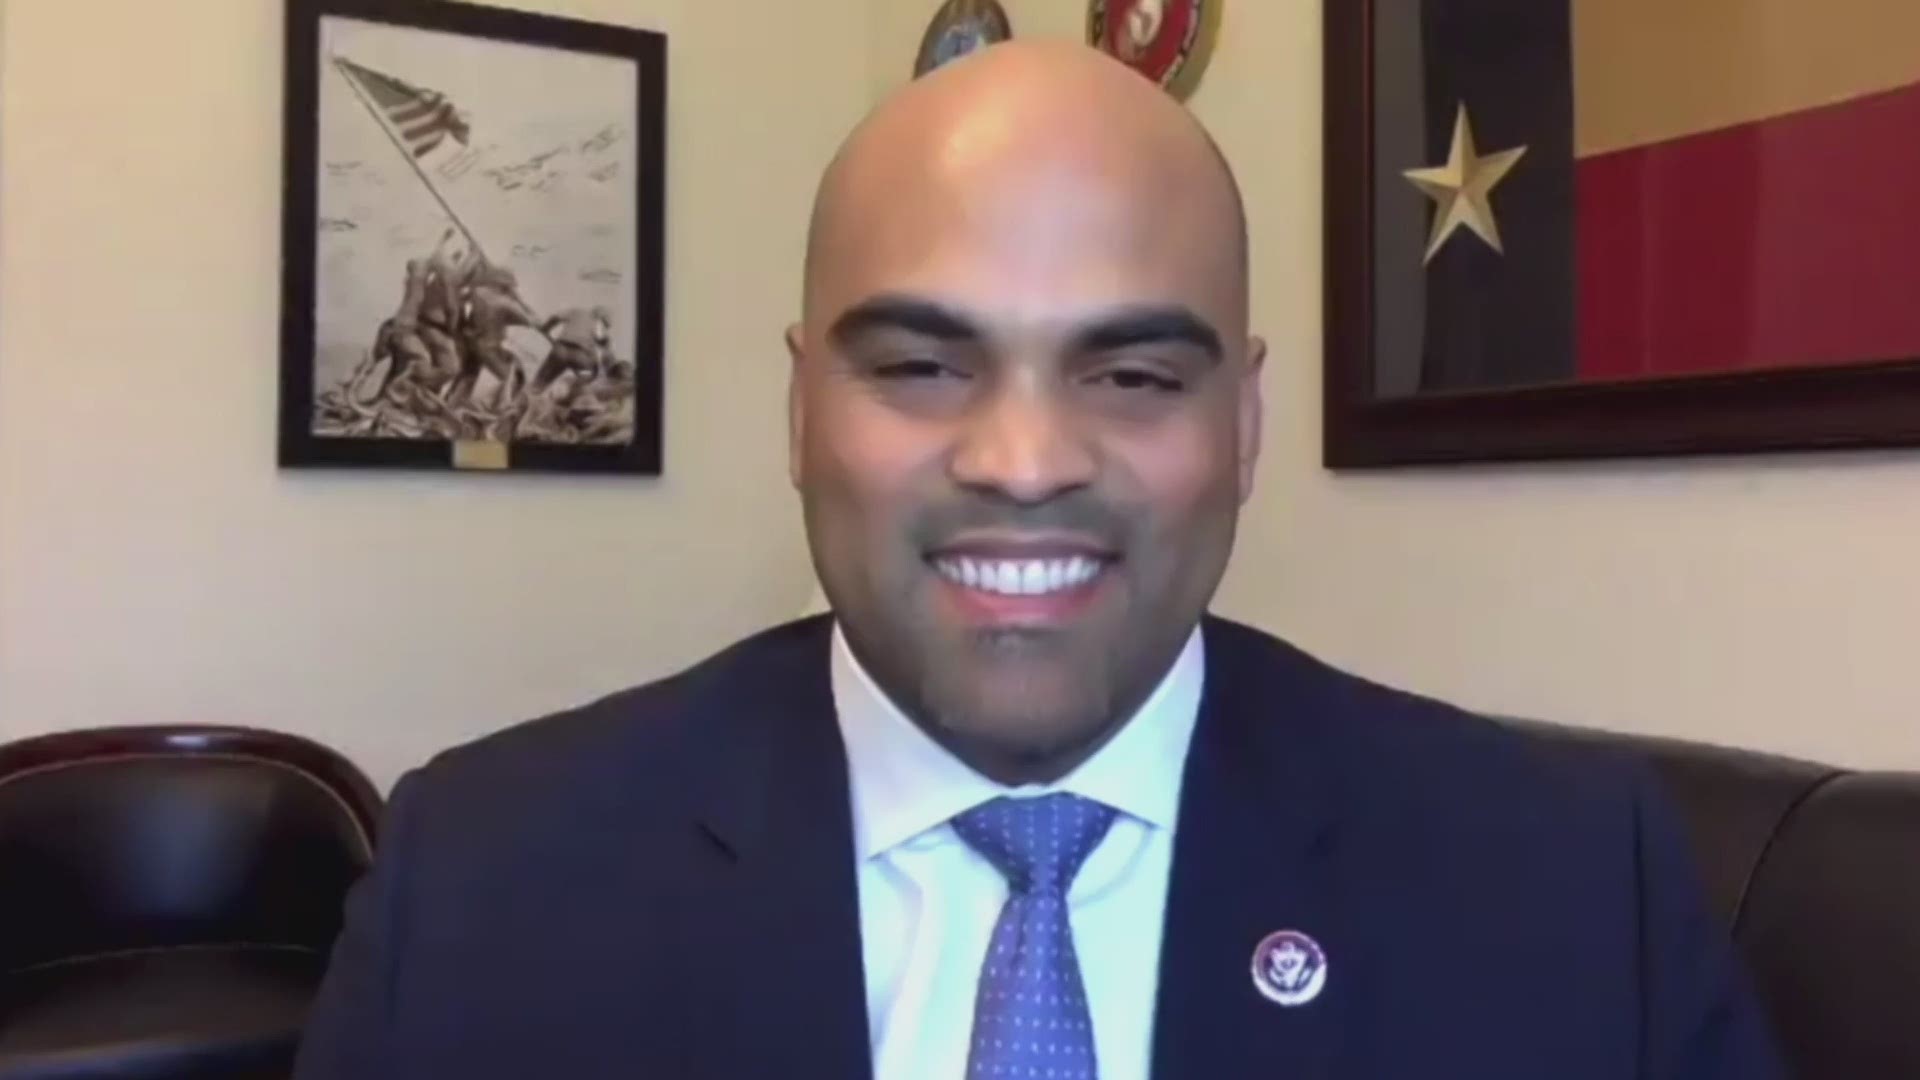 “This is the kind of common-sense bipartisan legislation that I came to Congress to try and introduce,” said U.S. Rep. Colin Allred, D-Dallas.